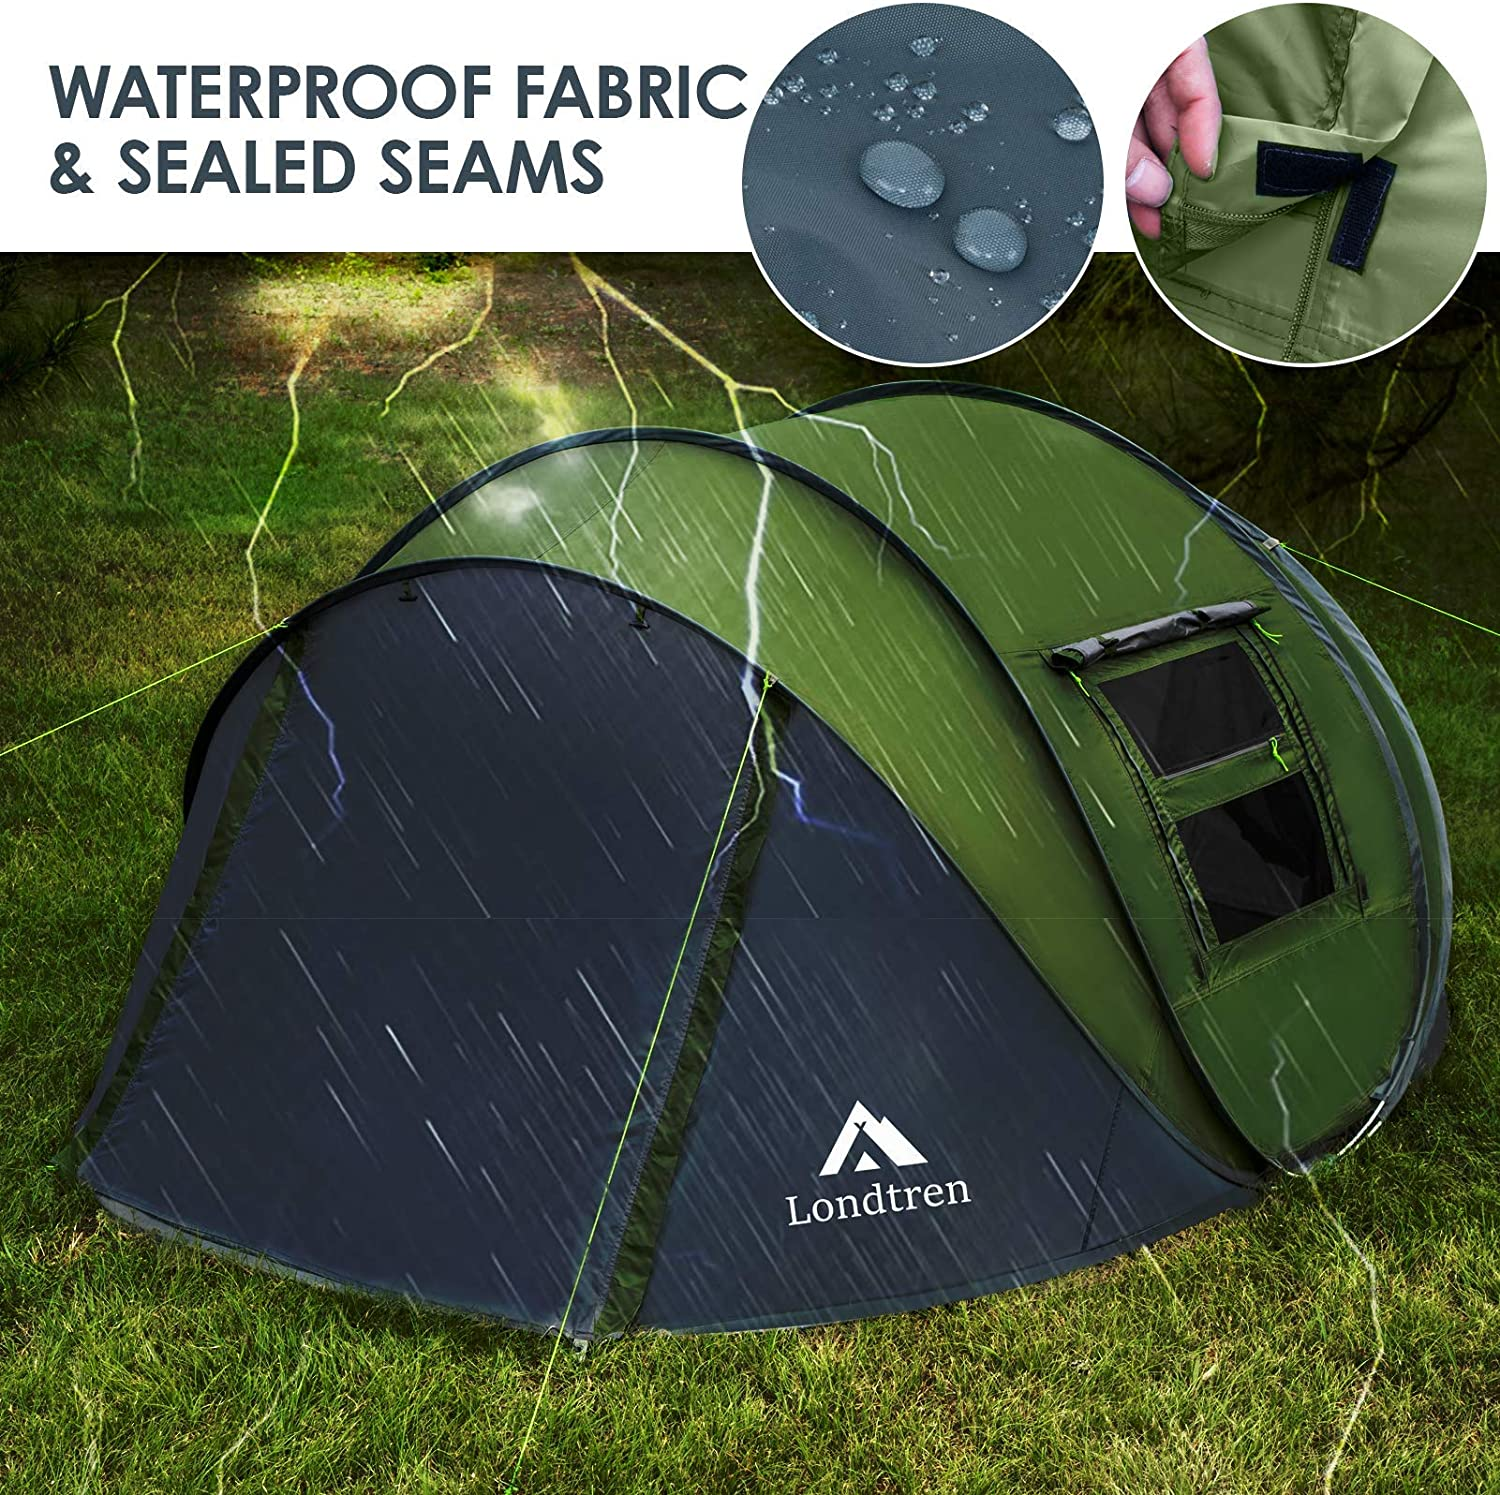 Pop Up Tents for Camping 4 Person Waterproof Tent, Size: 110*78*51, Green